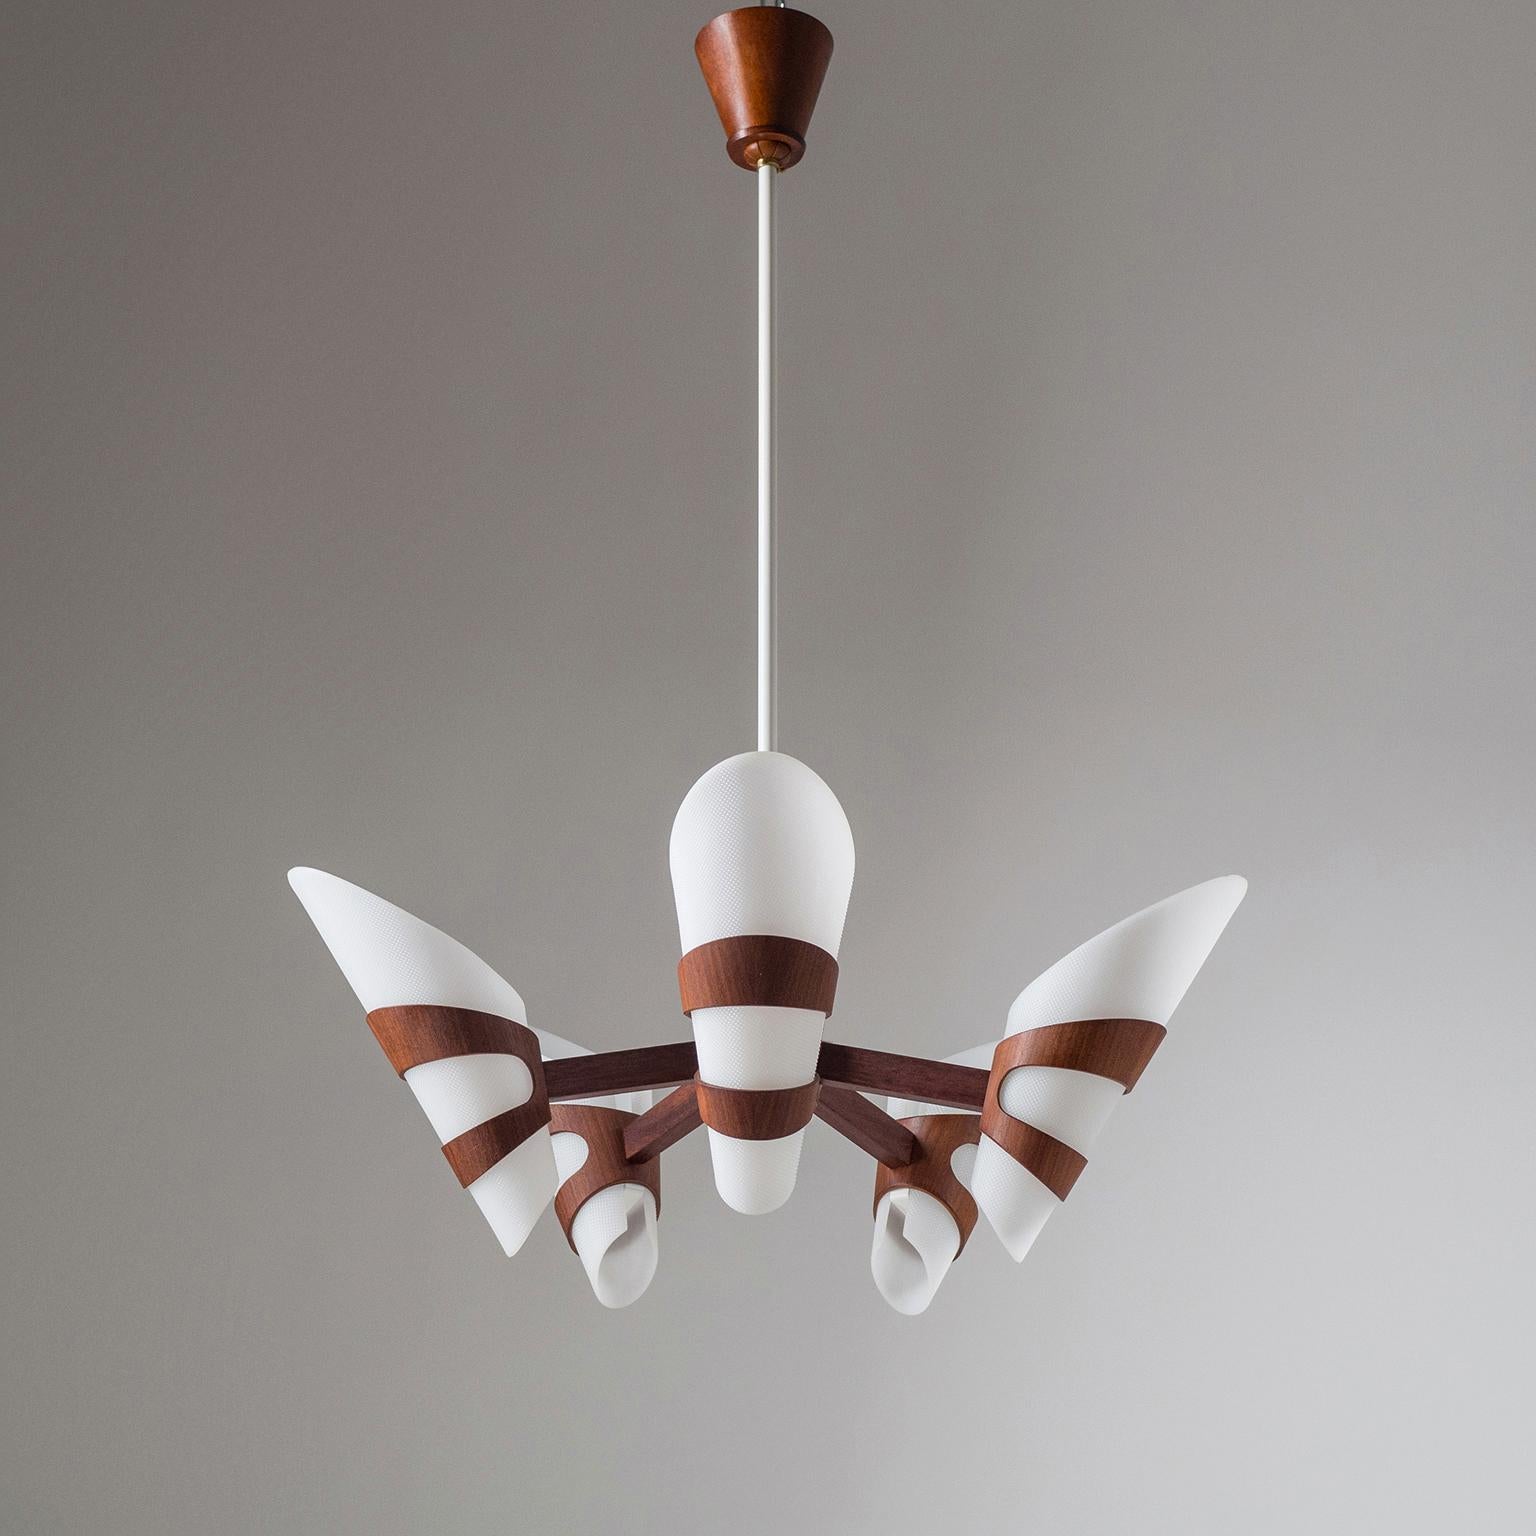 Rare graphical Scandinavian teak chandelier from the 1960s. The dark teak wood contrasted nicely with the cone shaped textured acrylic diffusers. White enameled stem with teak canopy. Very good condition with five original E14 sockets and new wiring.